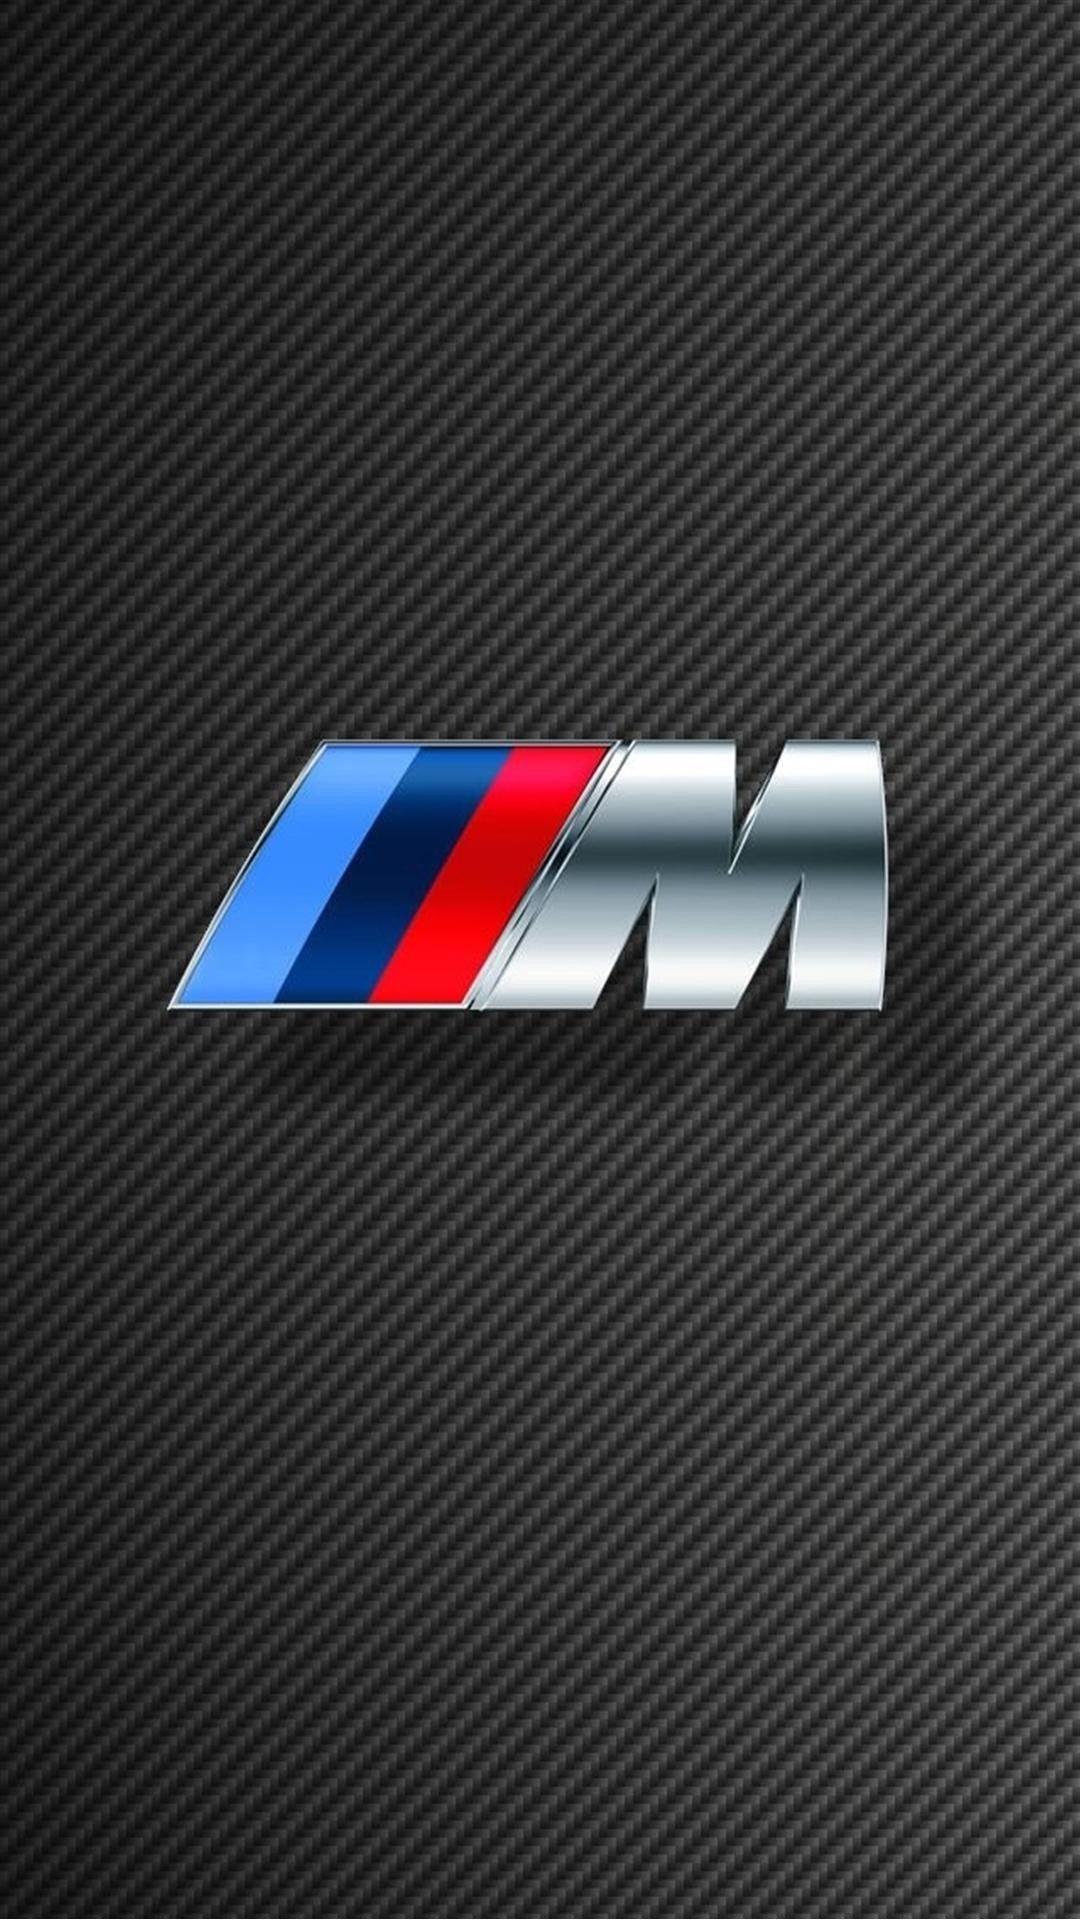 Background / Brands. BMW, Cars and BMW M5